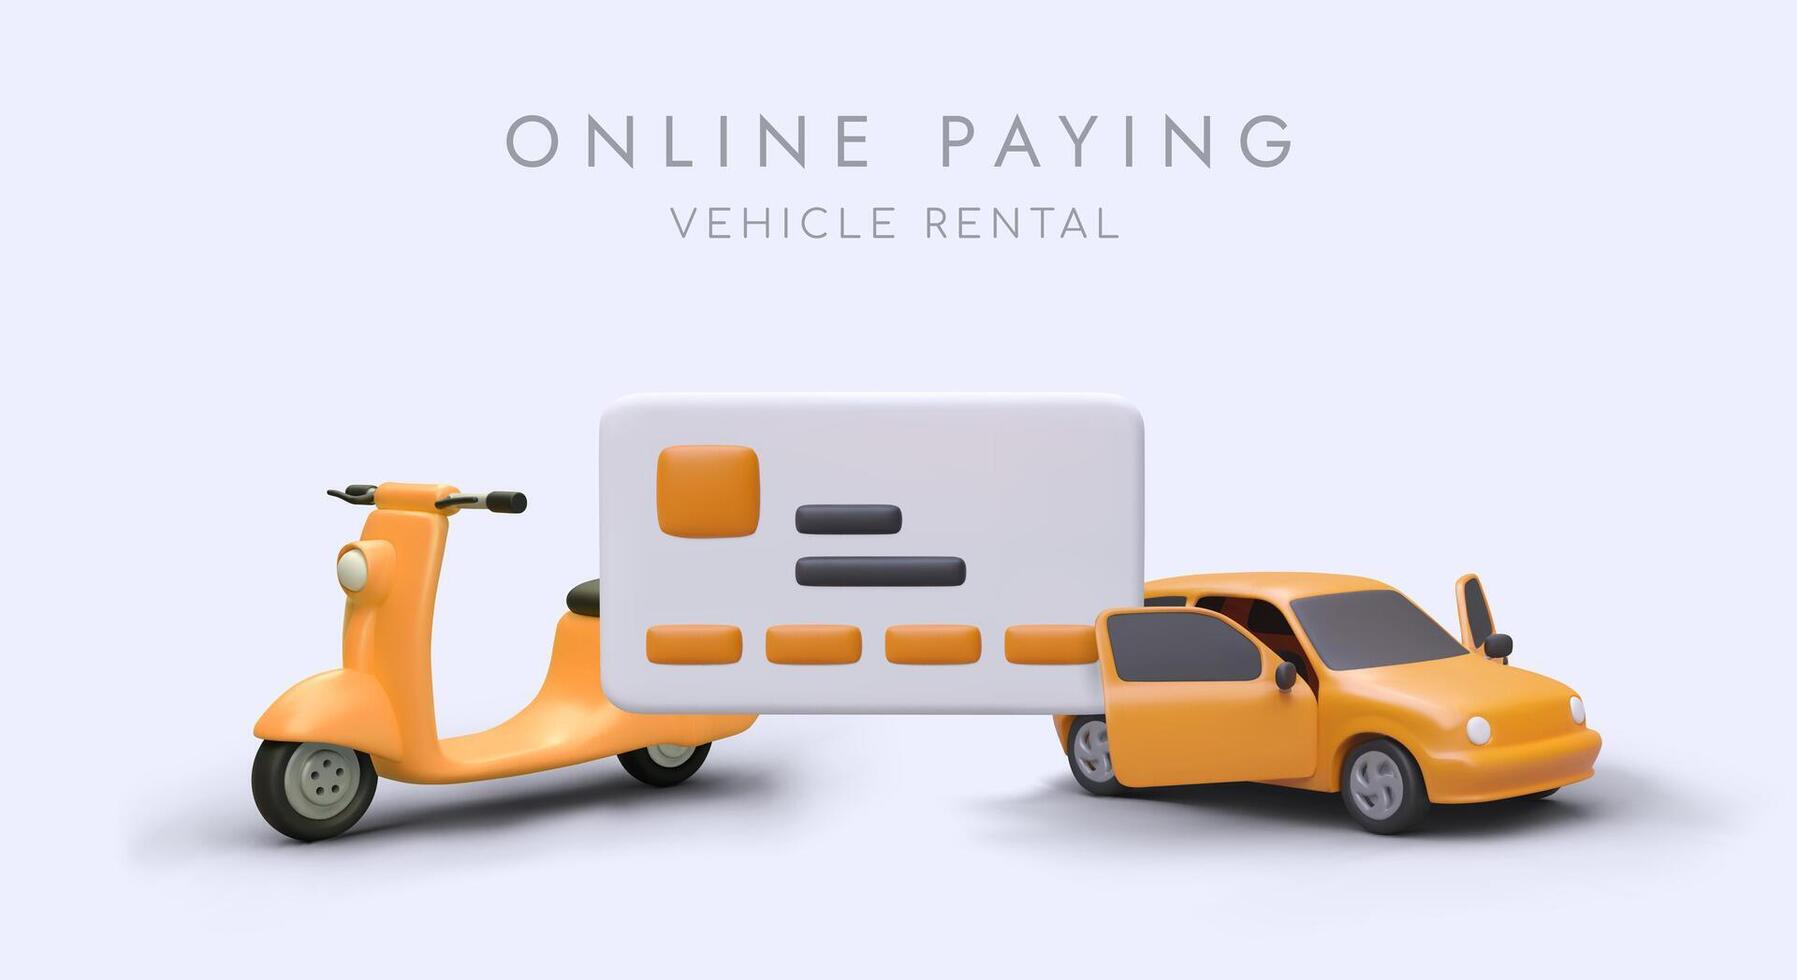 Payment of vehicle rental online. Choosing car and electric scooter remotely vector